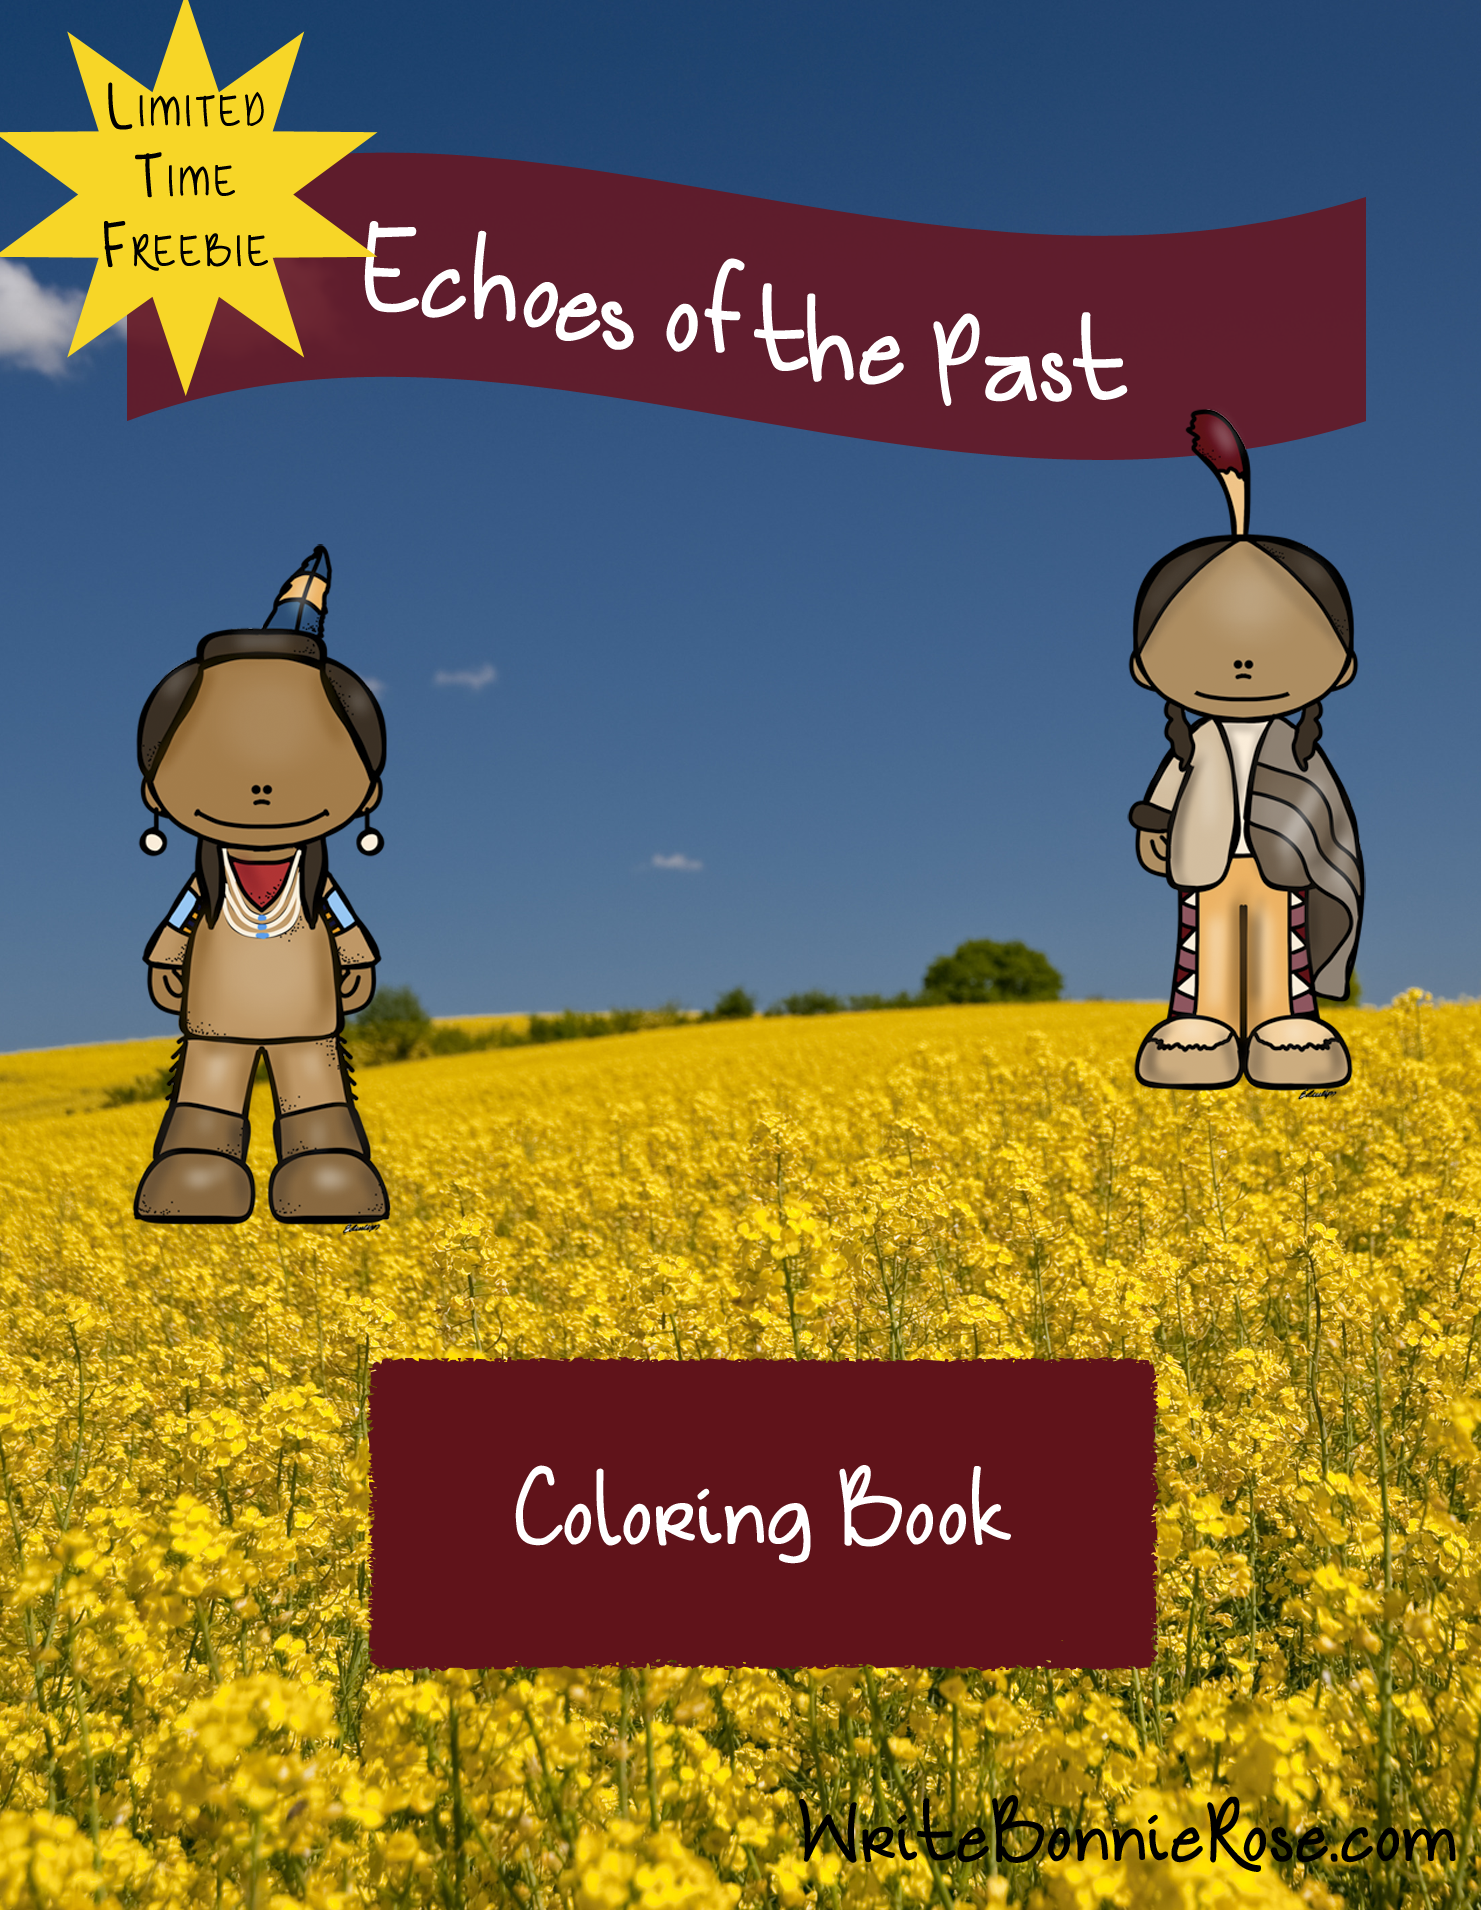 FREE Coloring Book-Echoes of the Past Limited Time